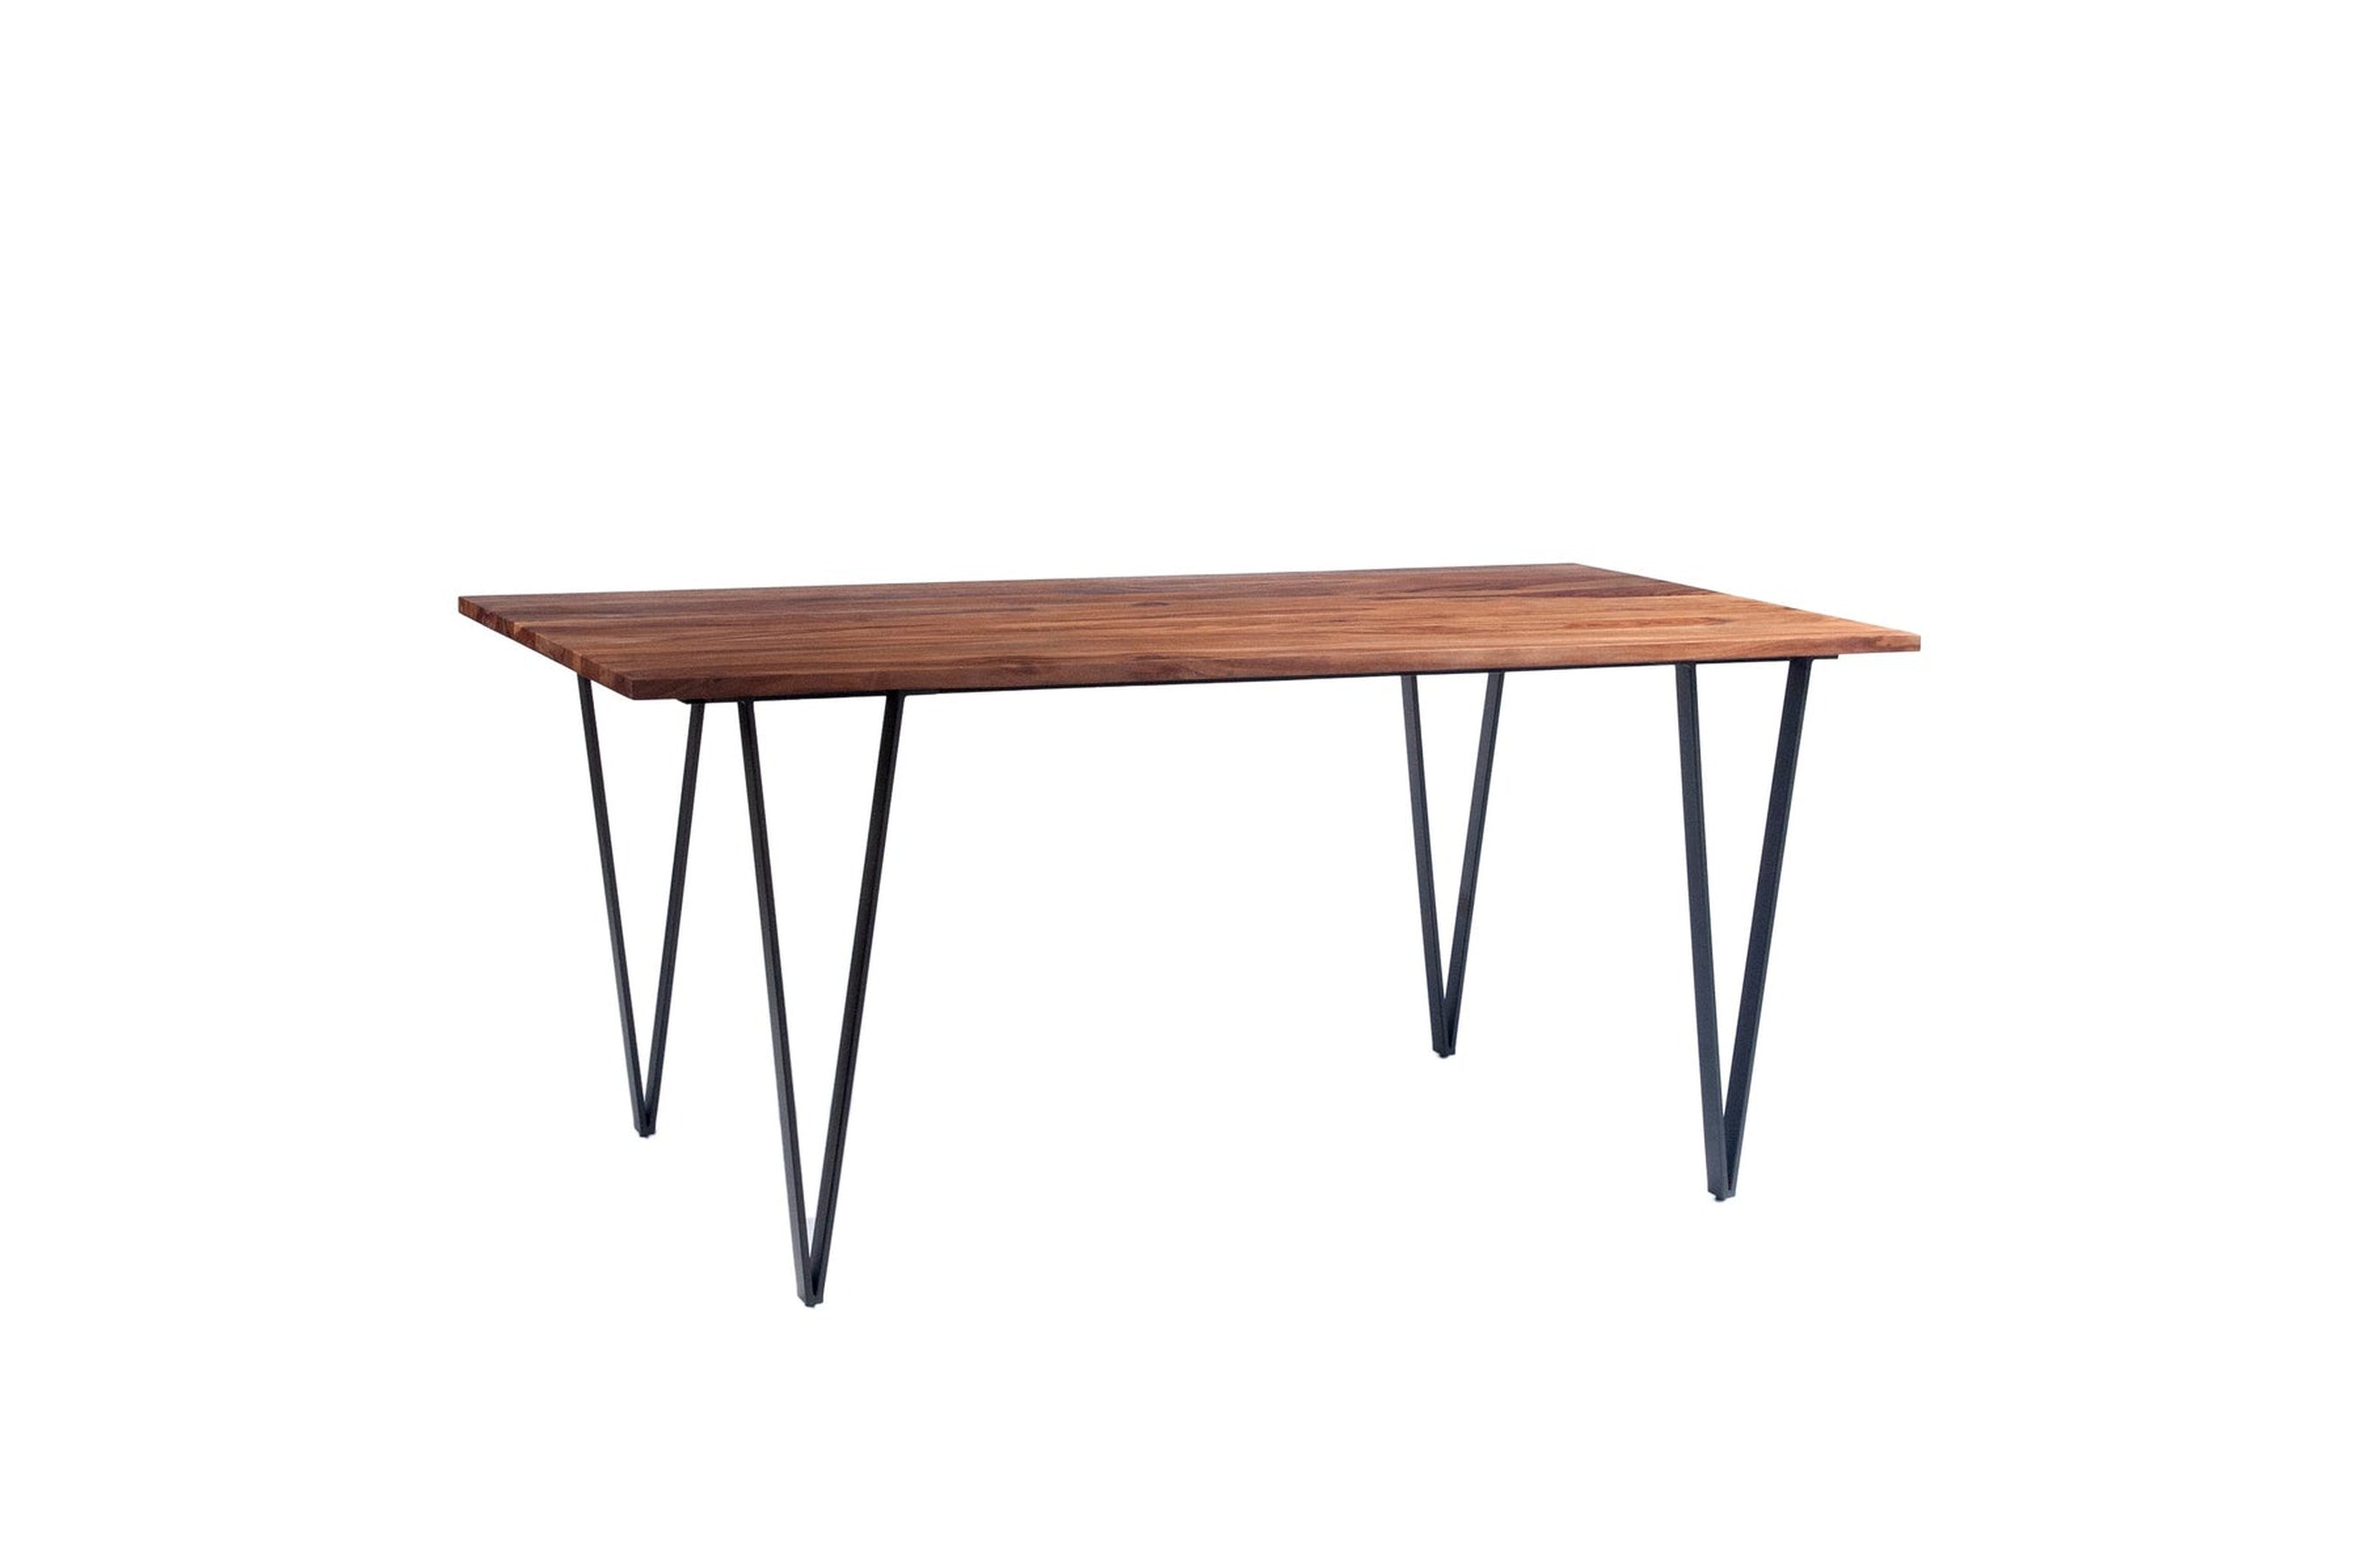 Contemporary Dining Table | Wooden Table with Black Iron Legs | Natural Wood Table for Dining Room | 175x90x76 cm